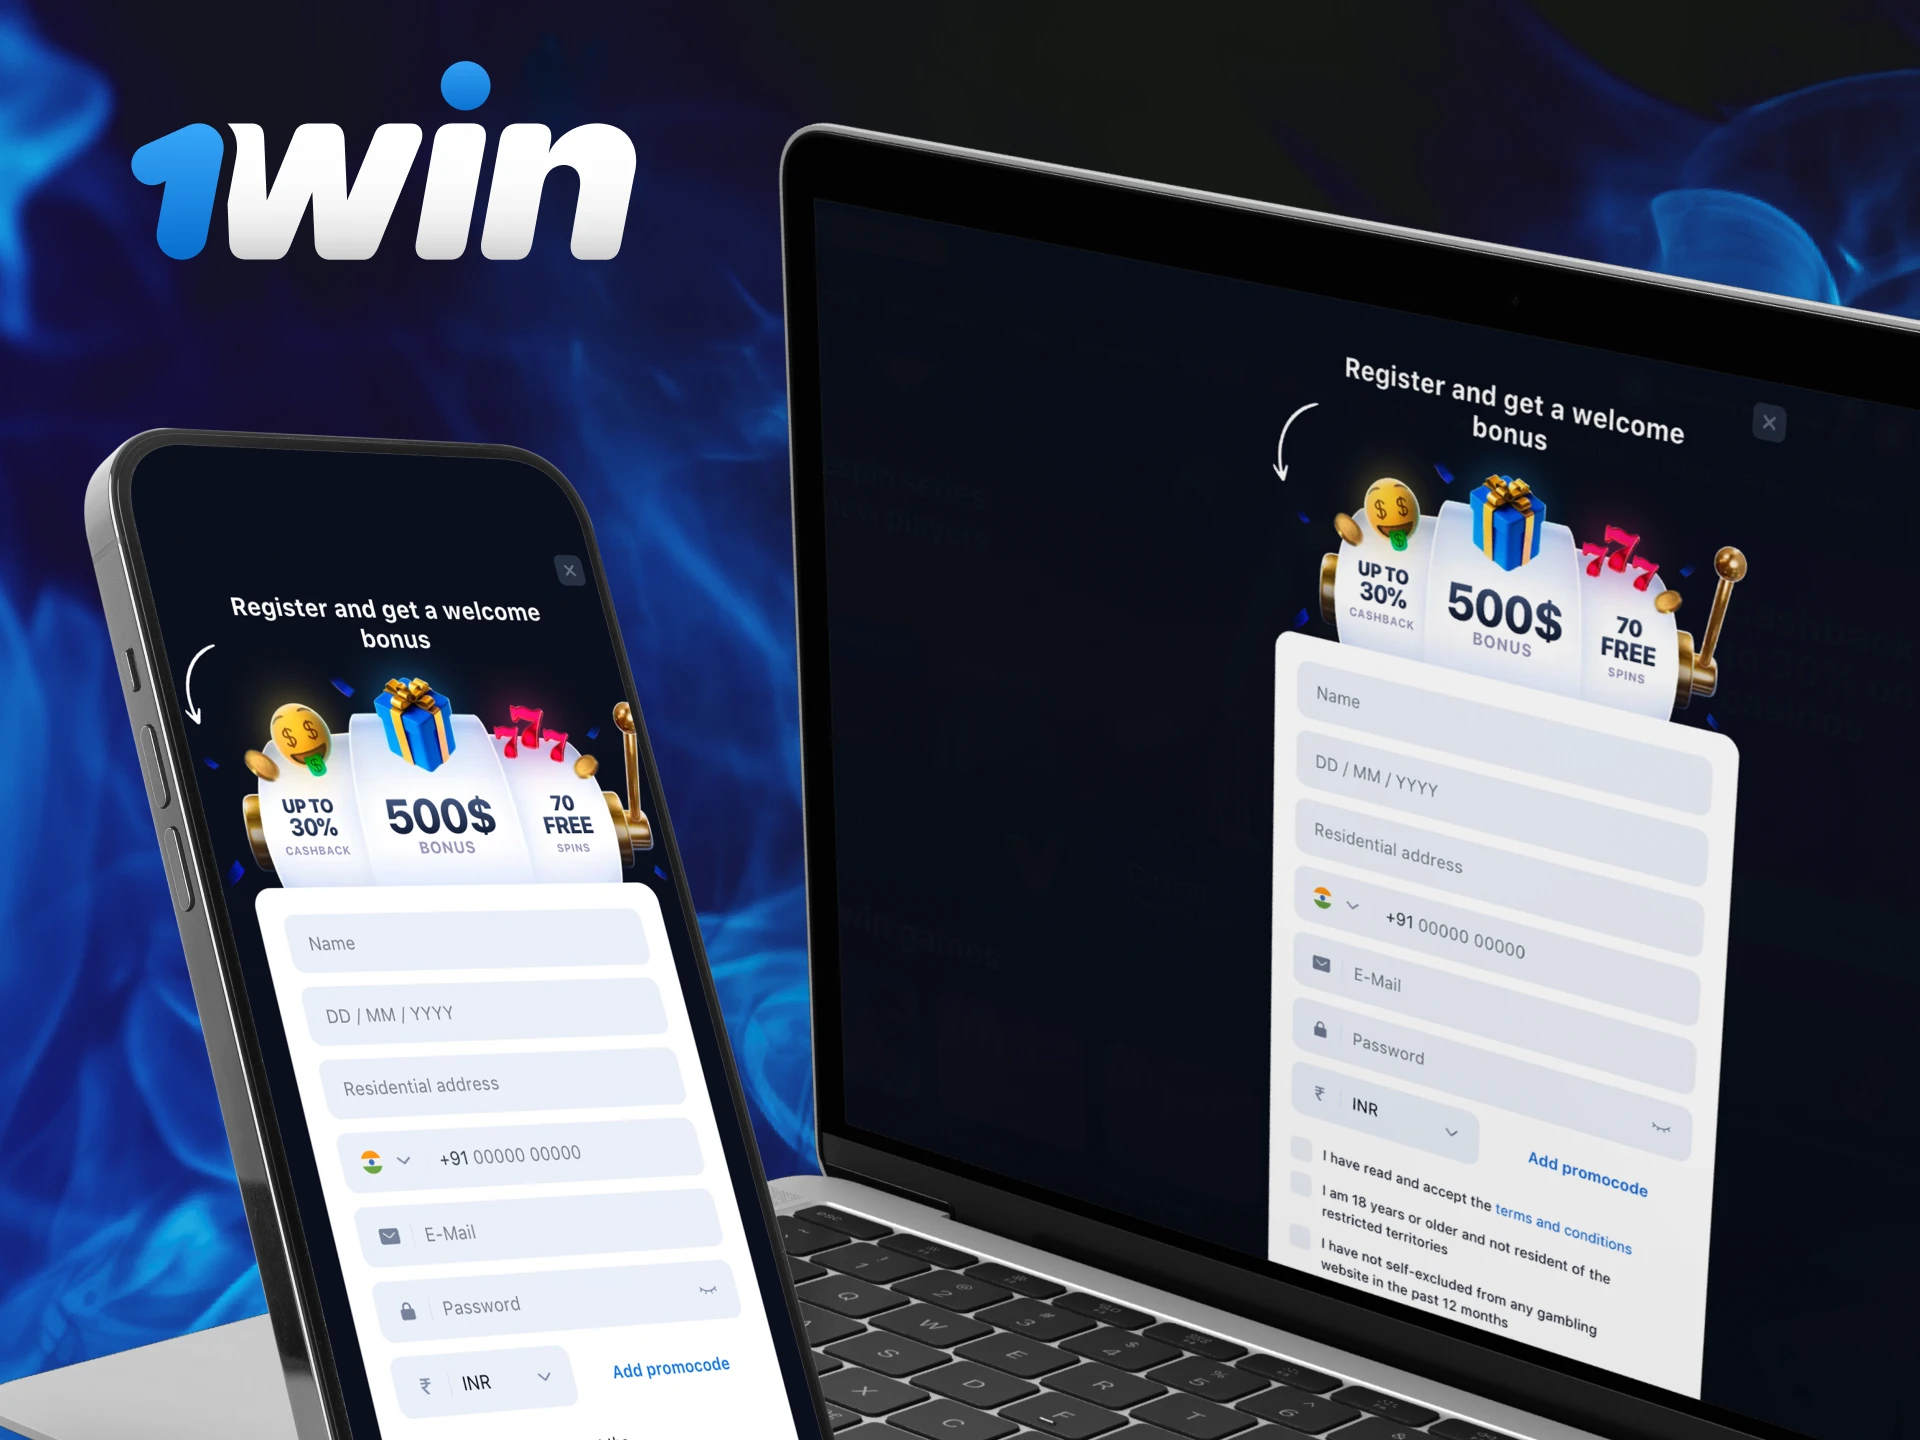 Step-by-step instructions on how to create an account on the 1Win casino website for the game Aviator.